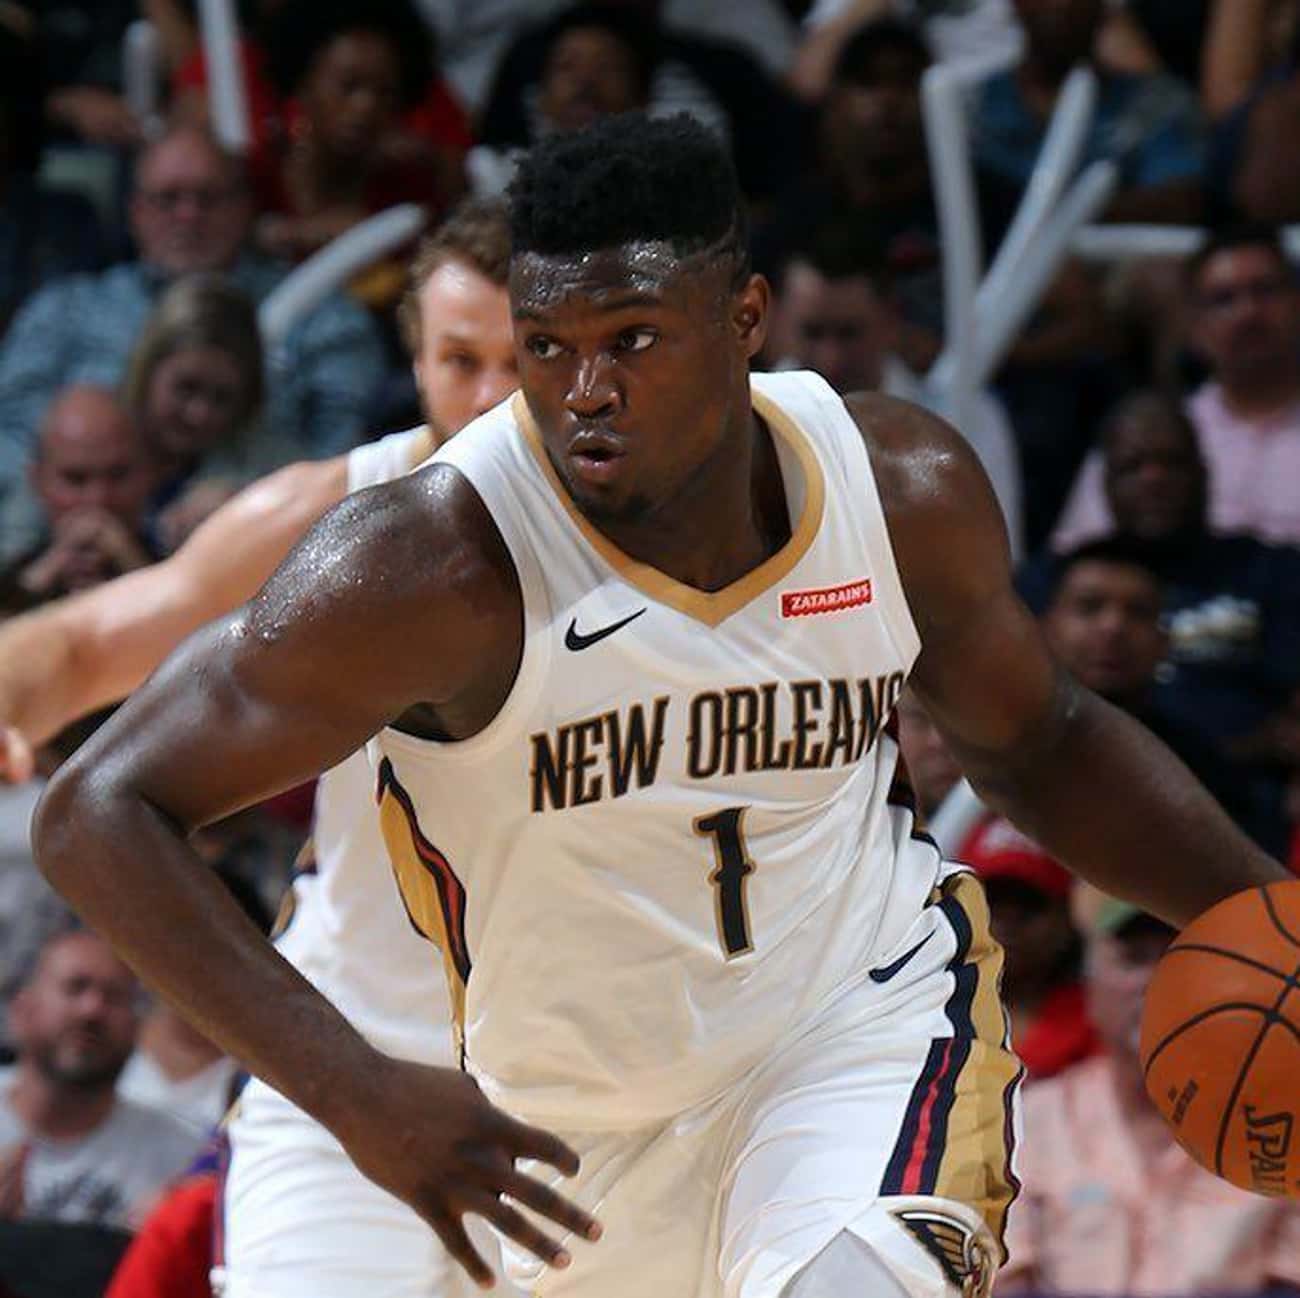 The Zion Williamson Lottery Ended Up Very Conveniently For New Orleans